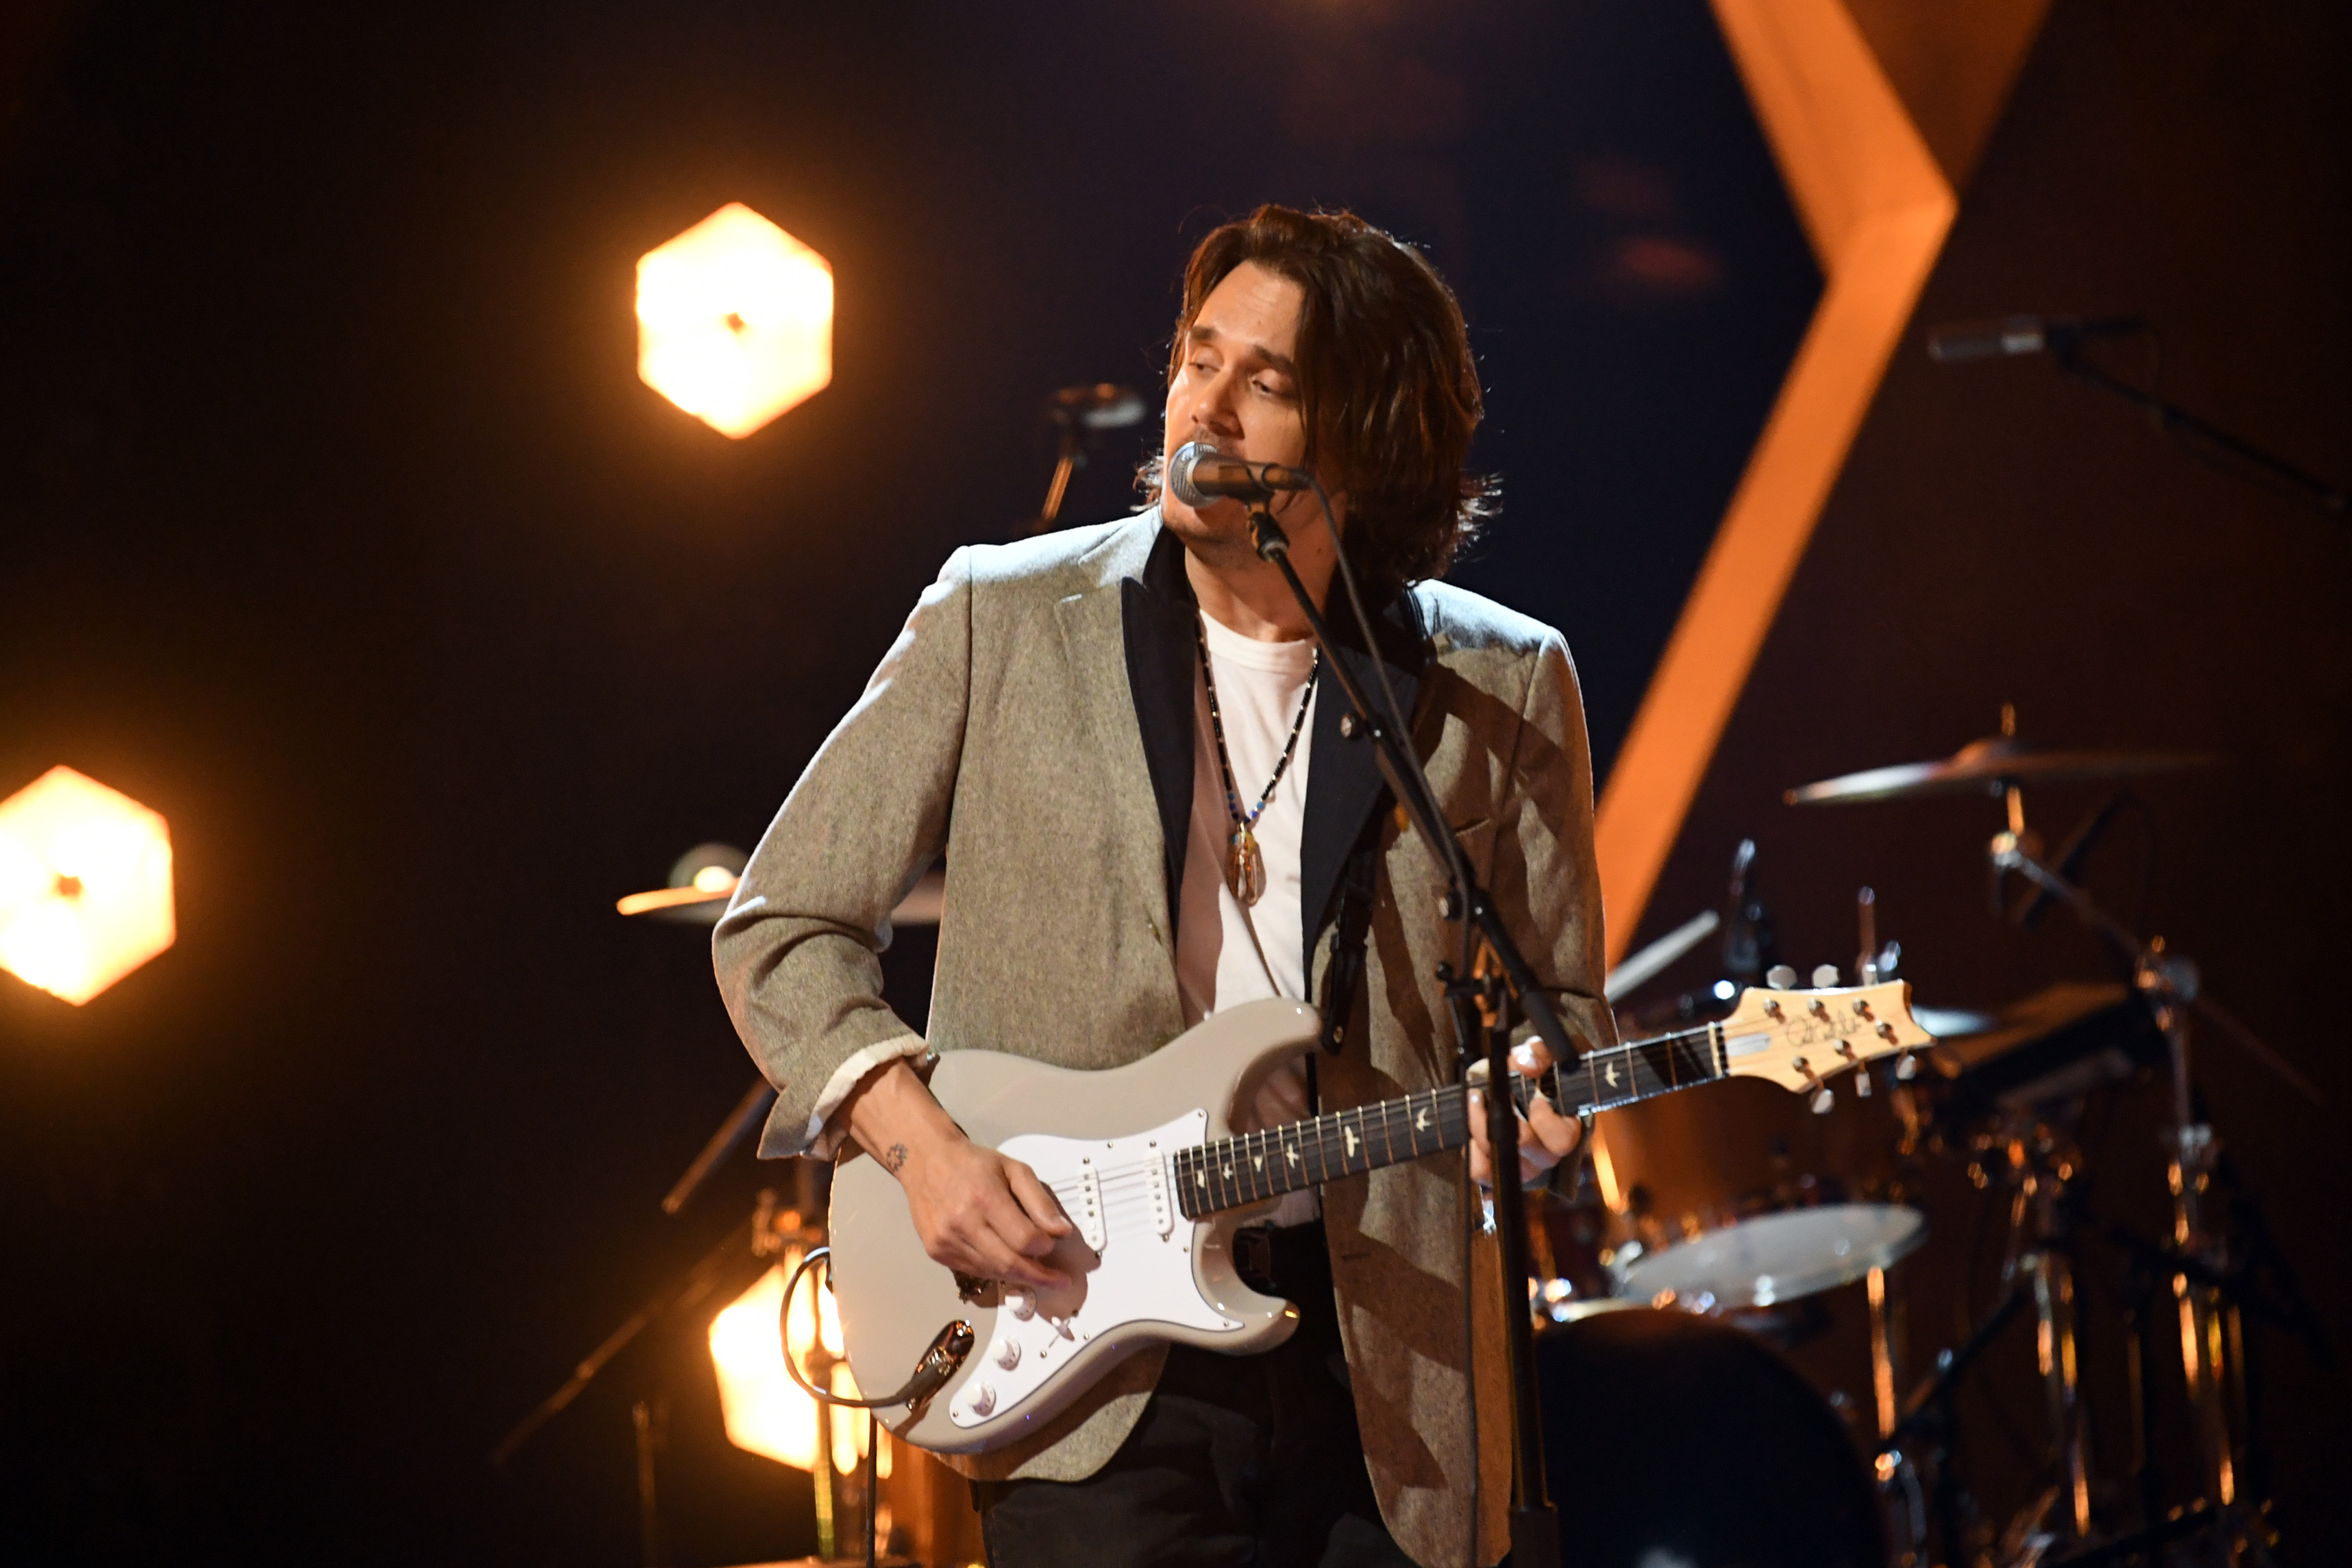 John Mayer performs onstage during the 63rd Annual GRAMMY Awards at Los Angeles Convention Center in Los Angeles, California and broadcast on March 14, 2021.